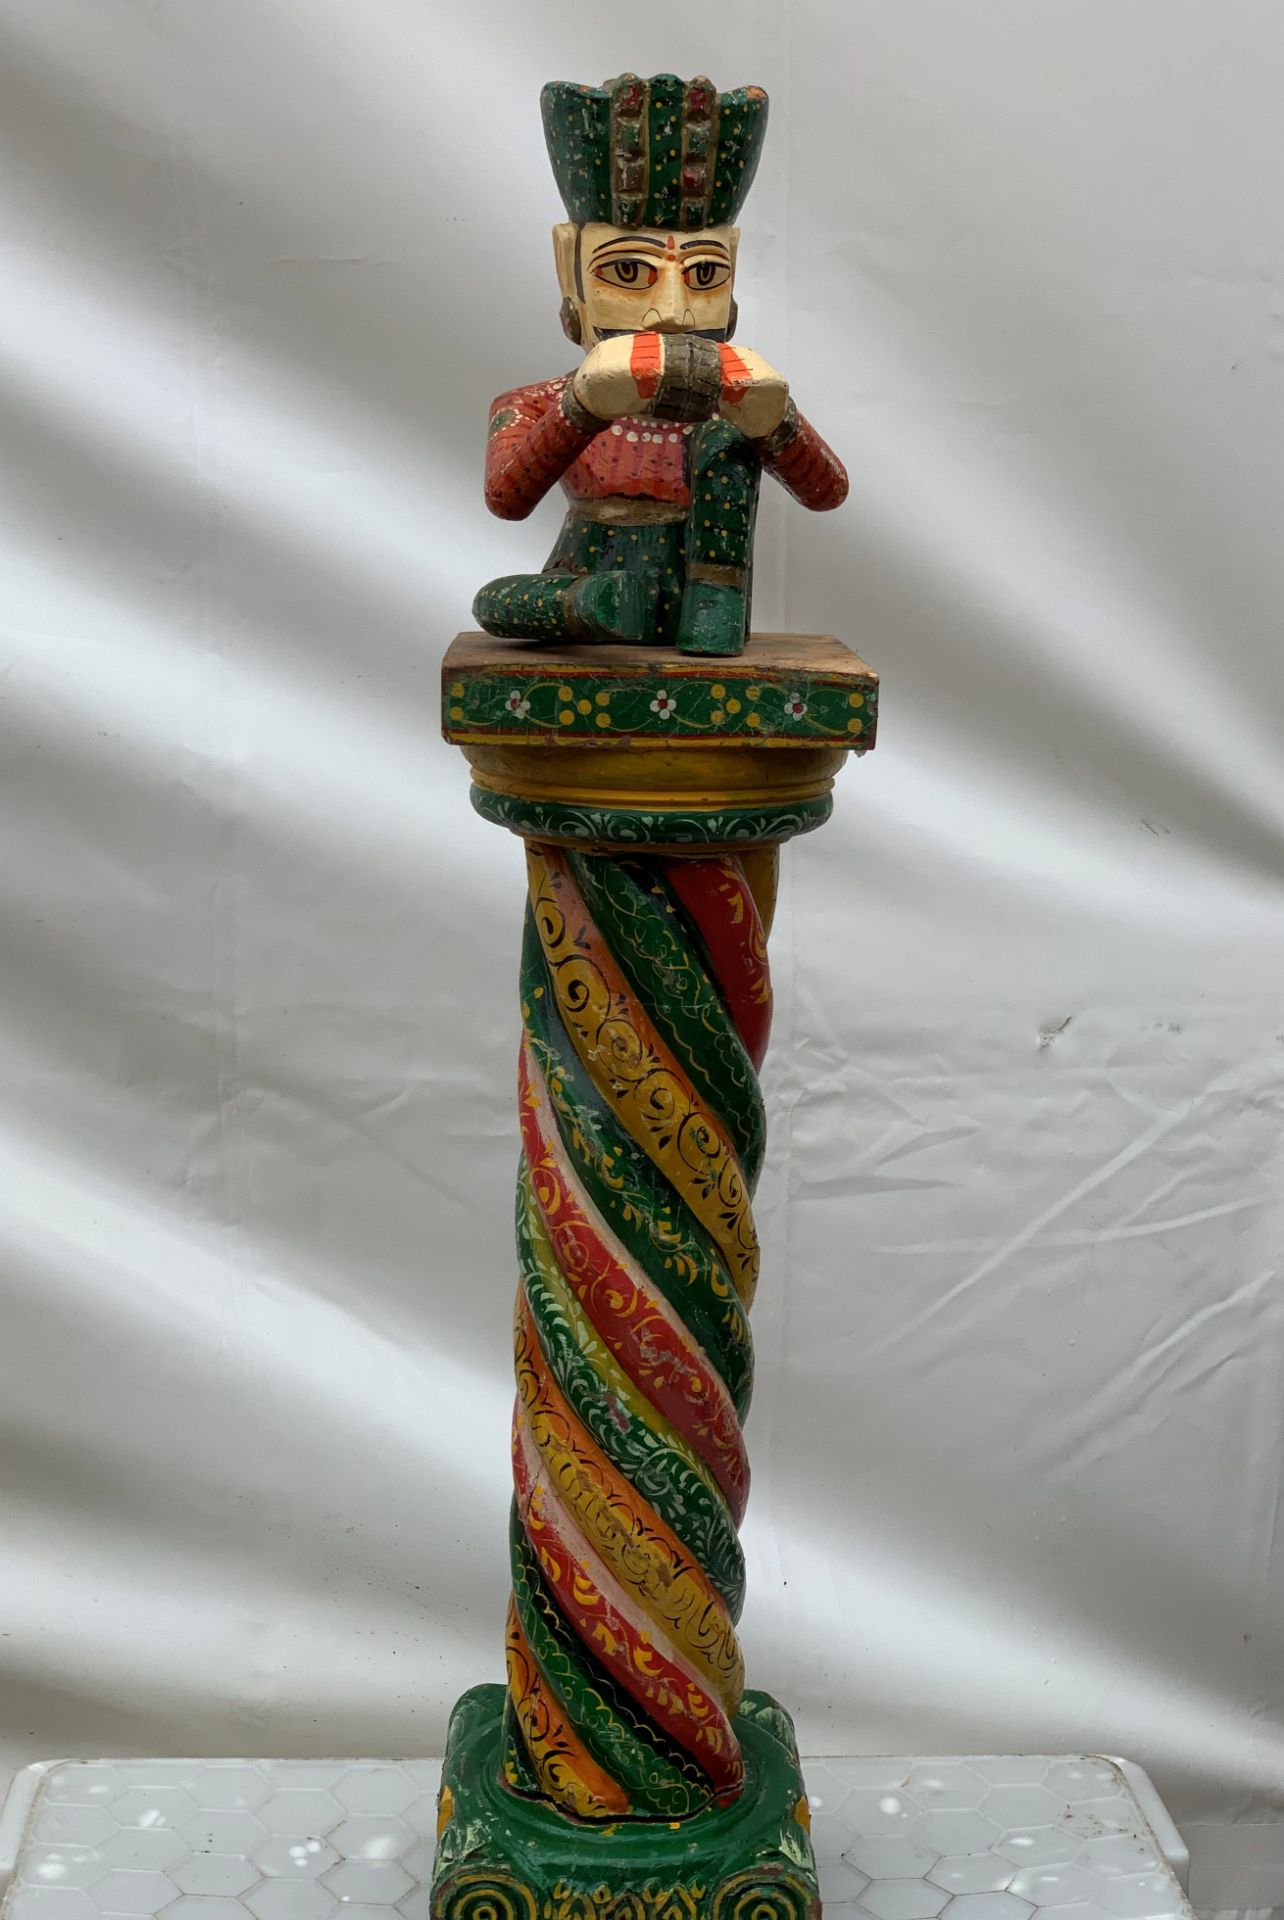 1 x Indian Statue On Pedestal - Dimensions: 76cm (h) x 23cm (w) - Pre-owned - CL548 - Location: Near - Image 2 of 2